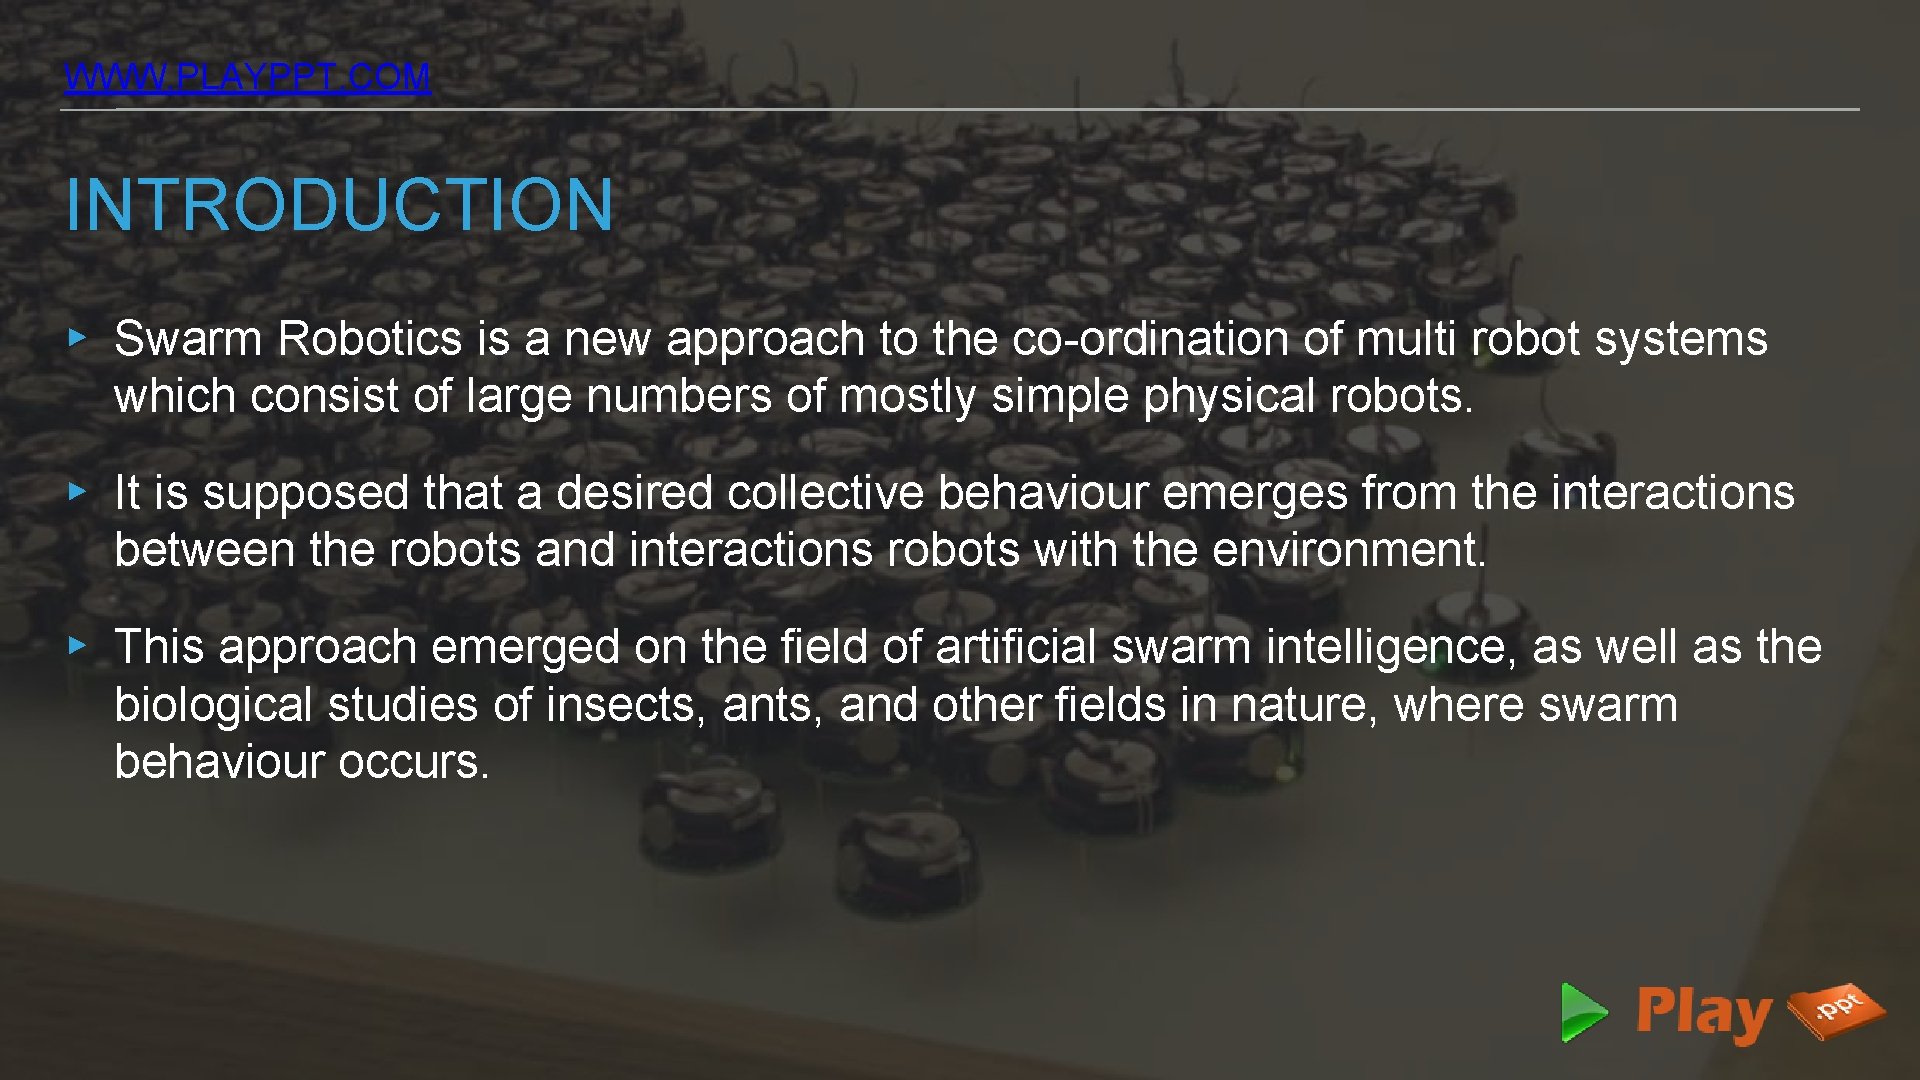 WWW. PLAYPPT. COM INTRODUCTION ▸ Swarm Robotics is a new approach to the co-ordination